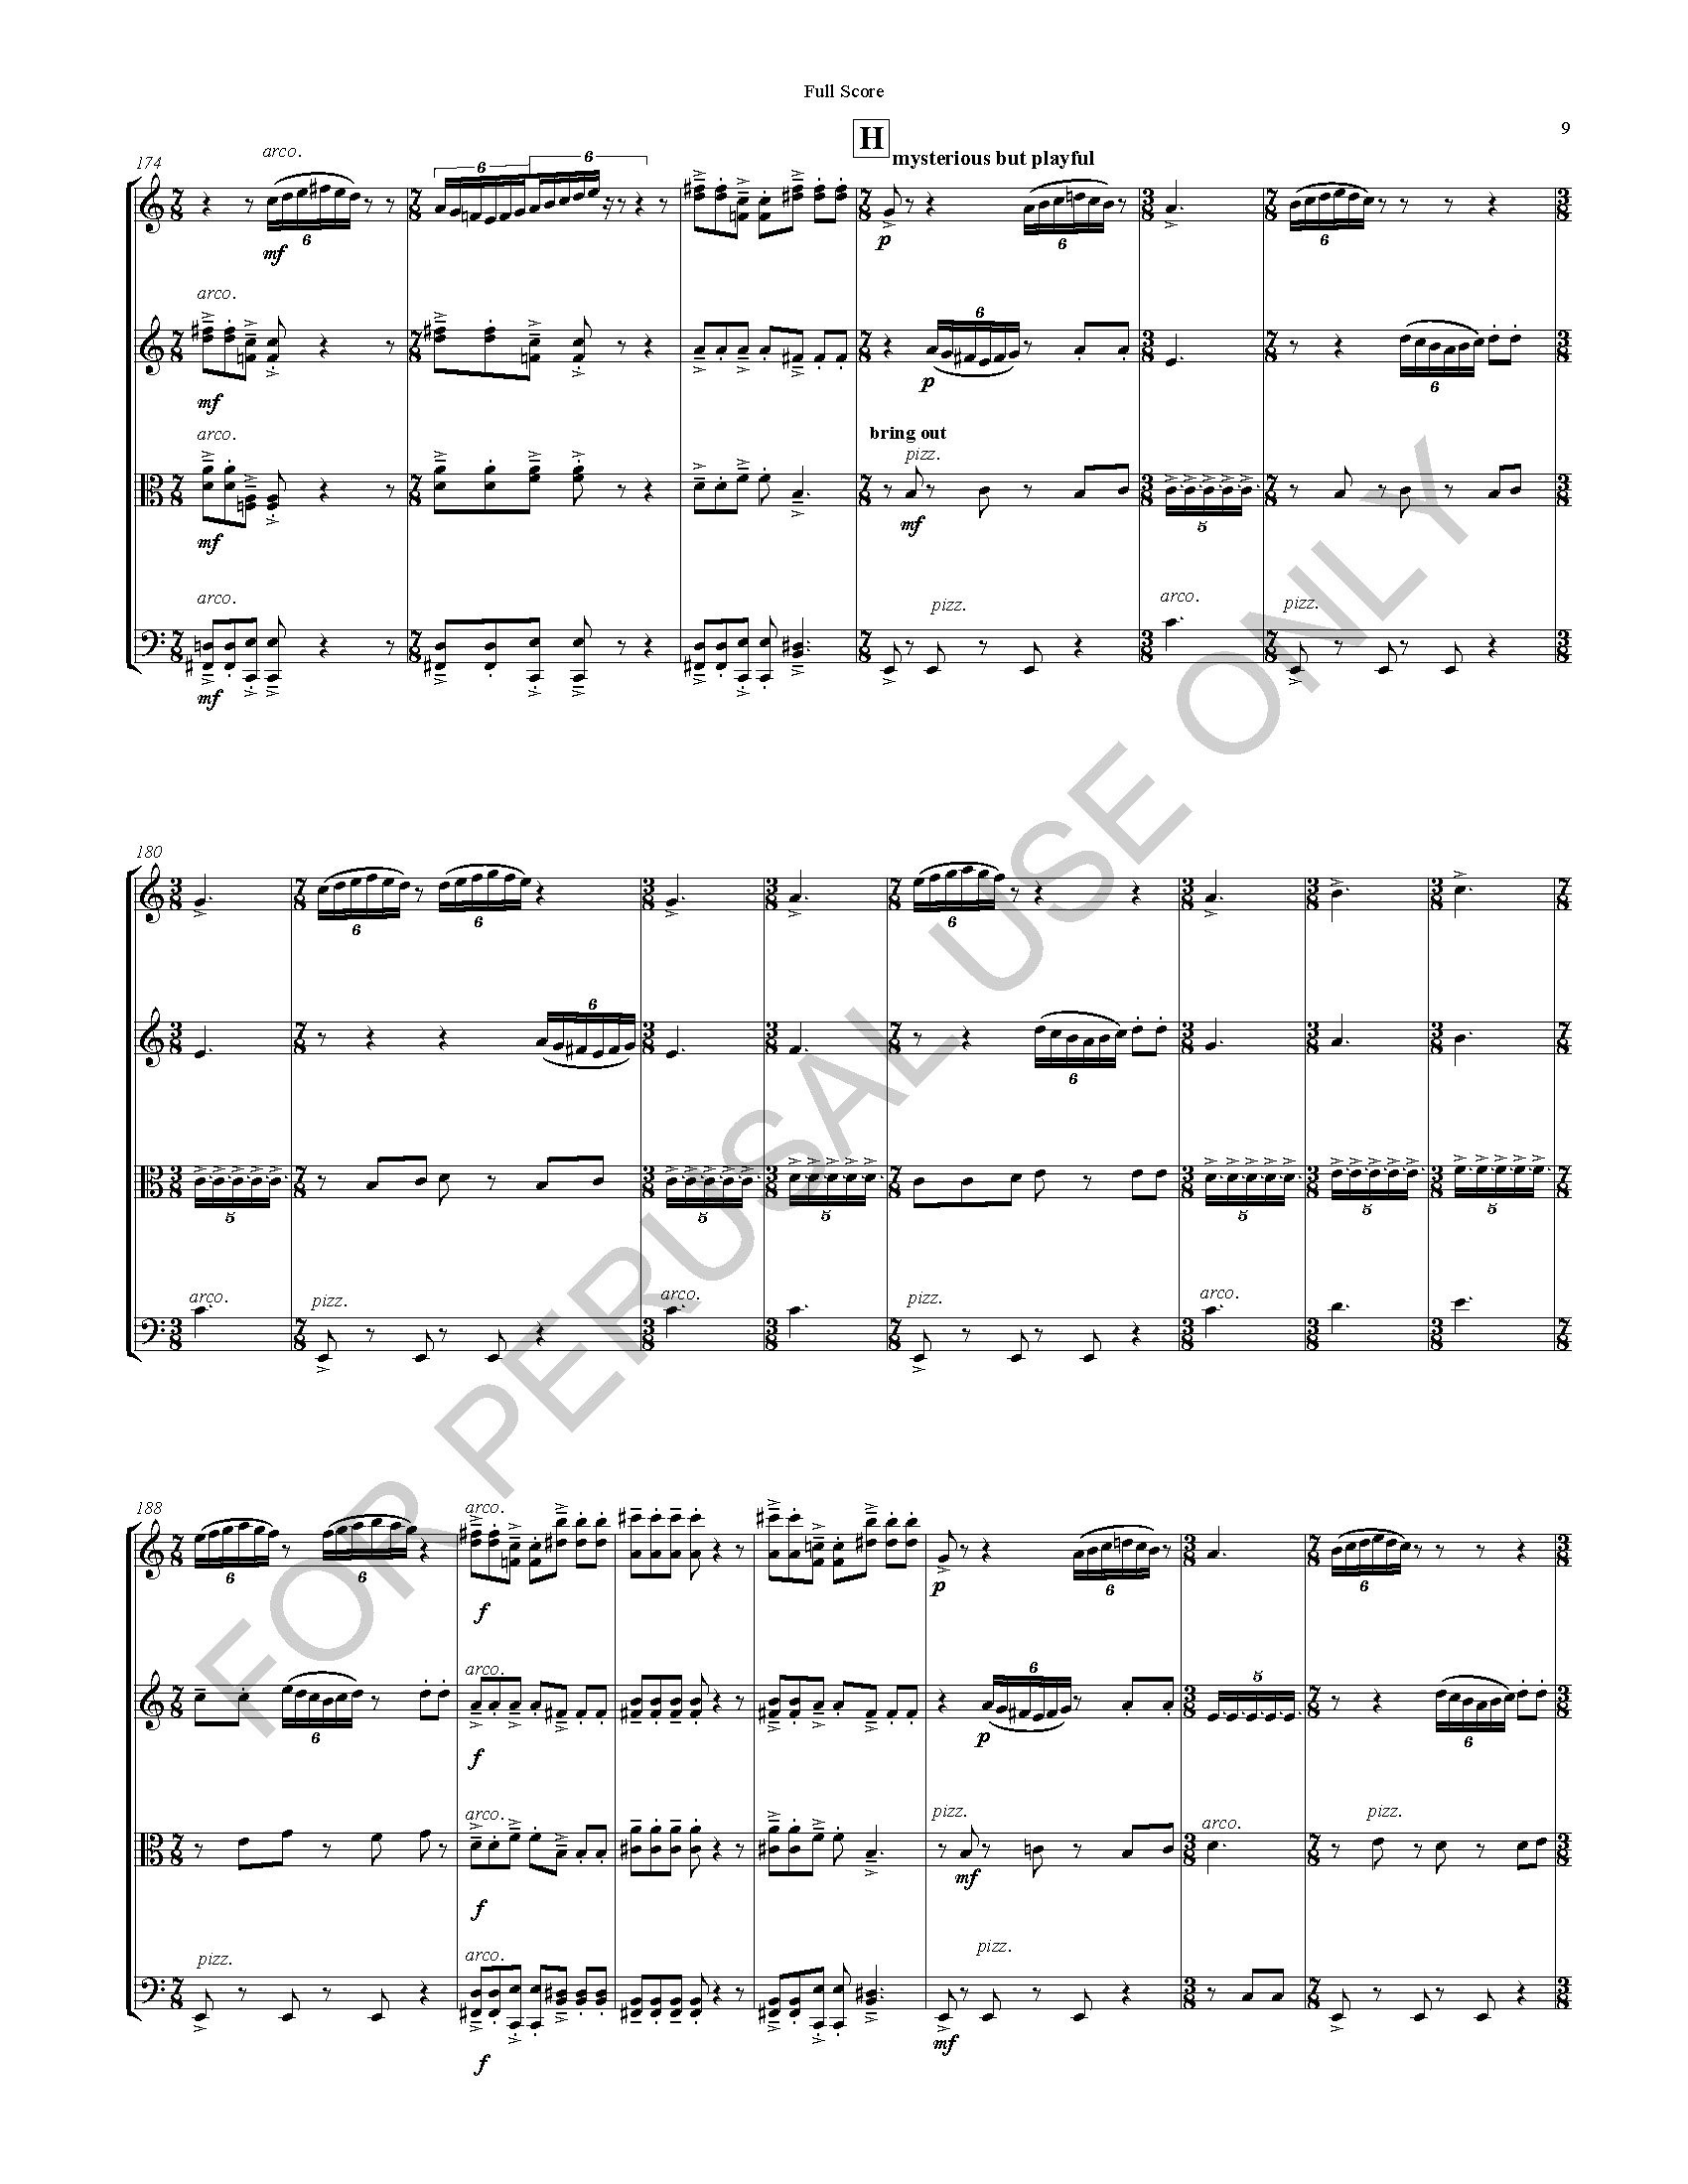 REFERENCE Smear Music (Full Score)_Page_09.jpg